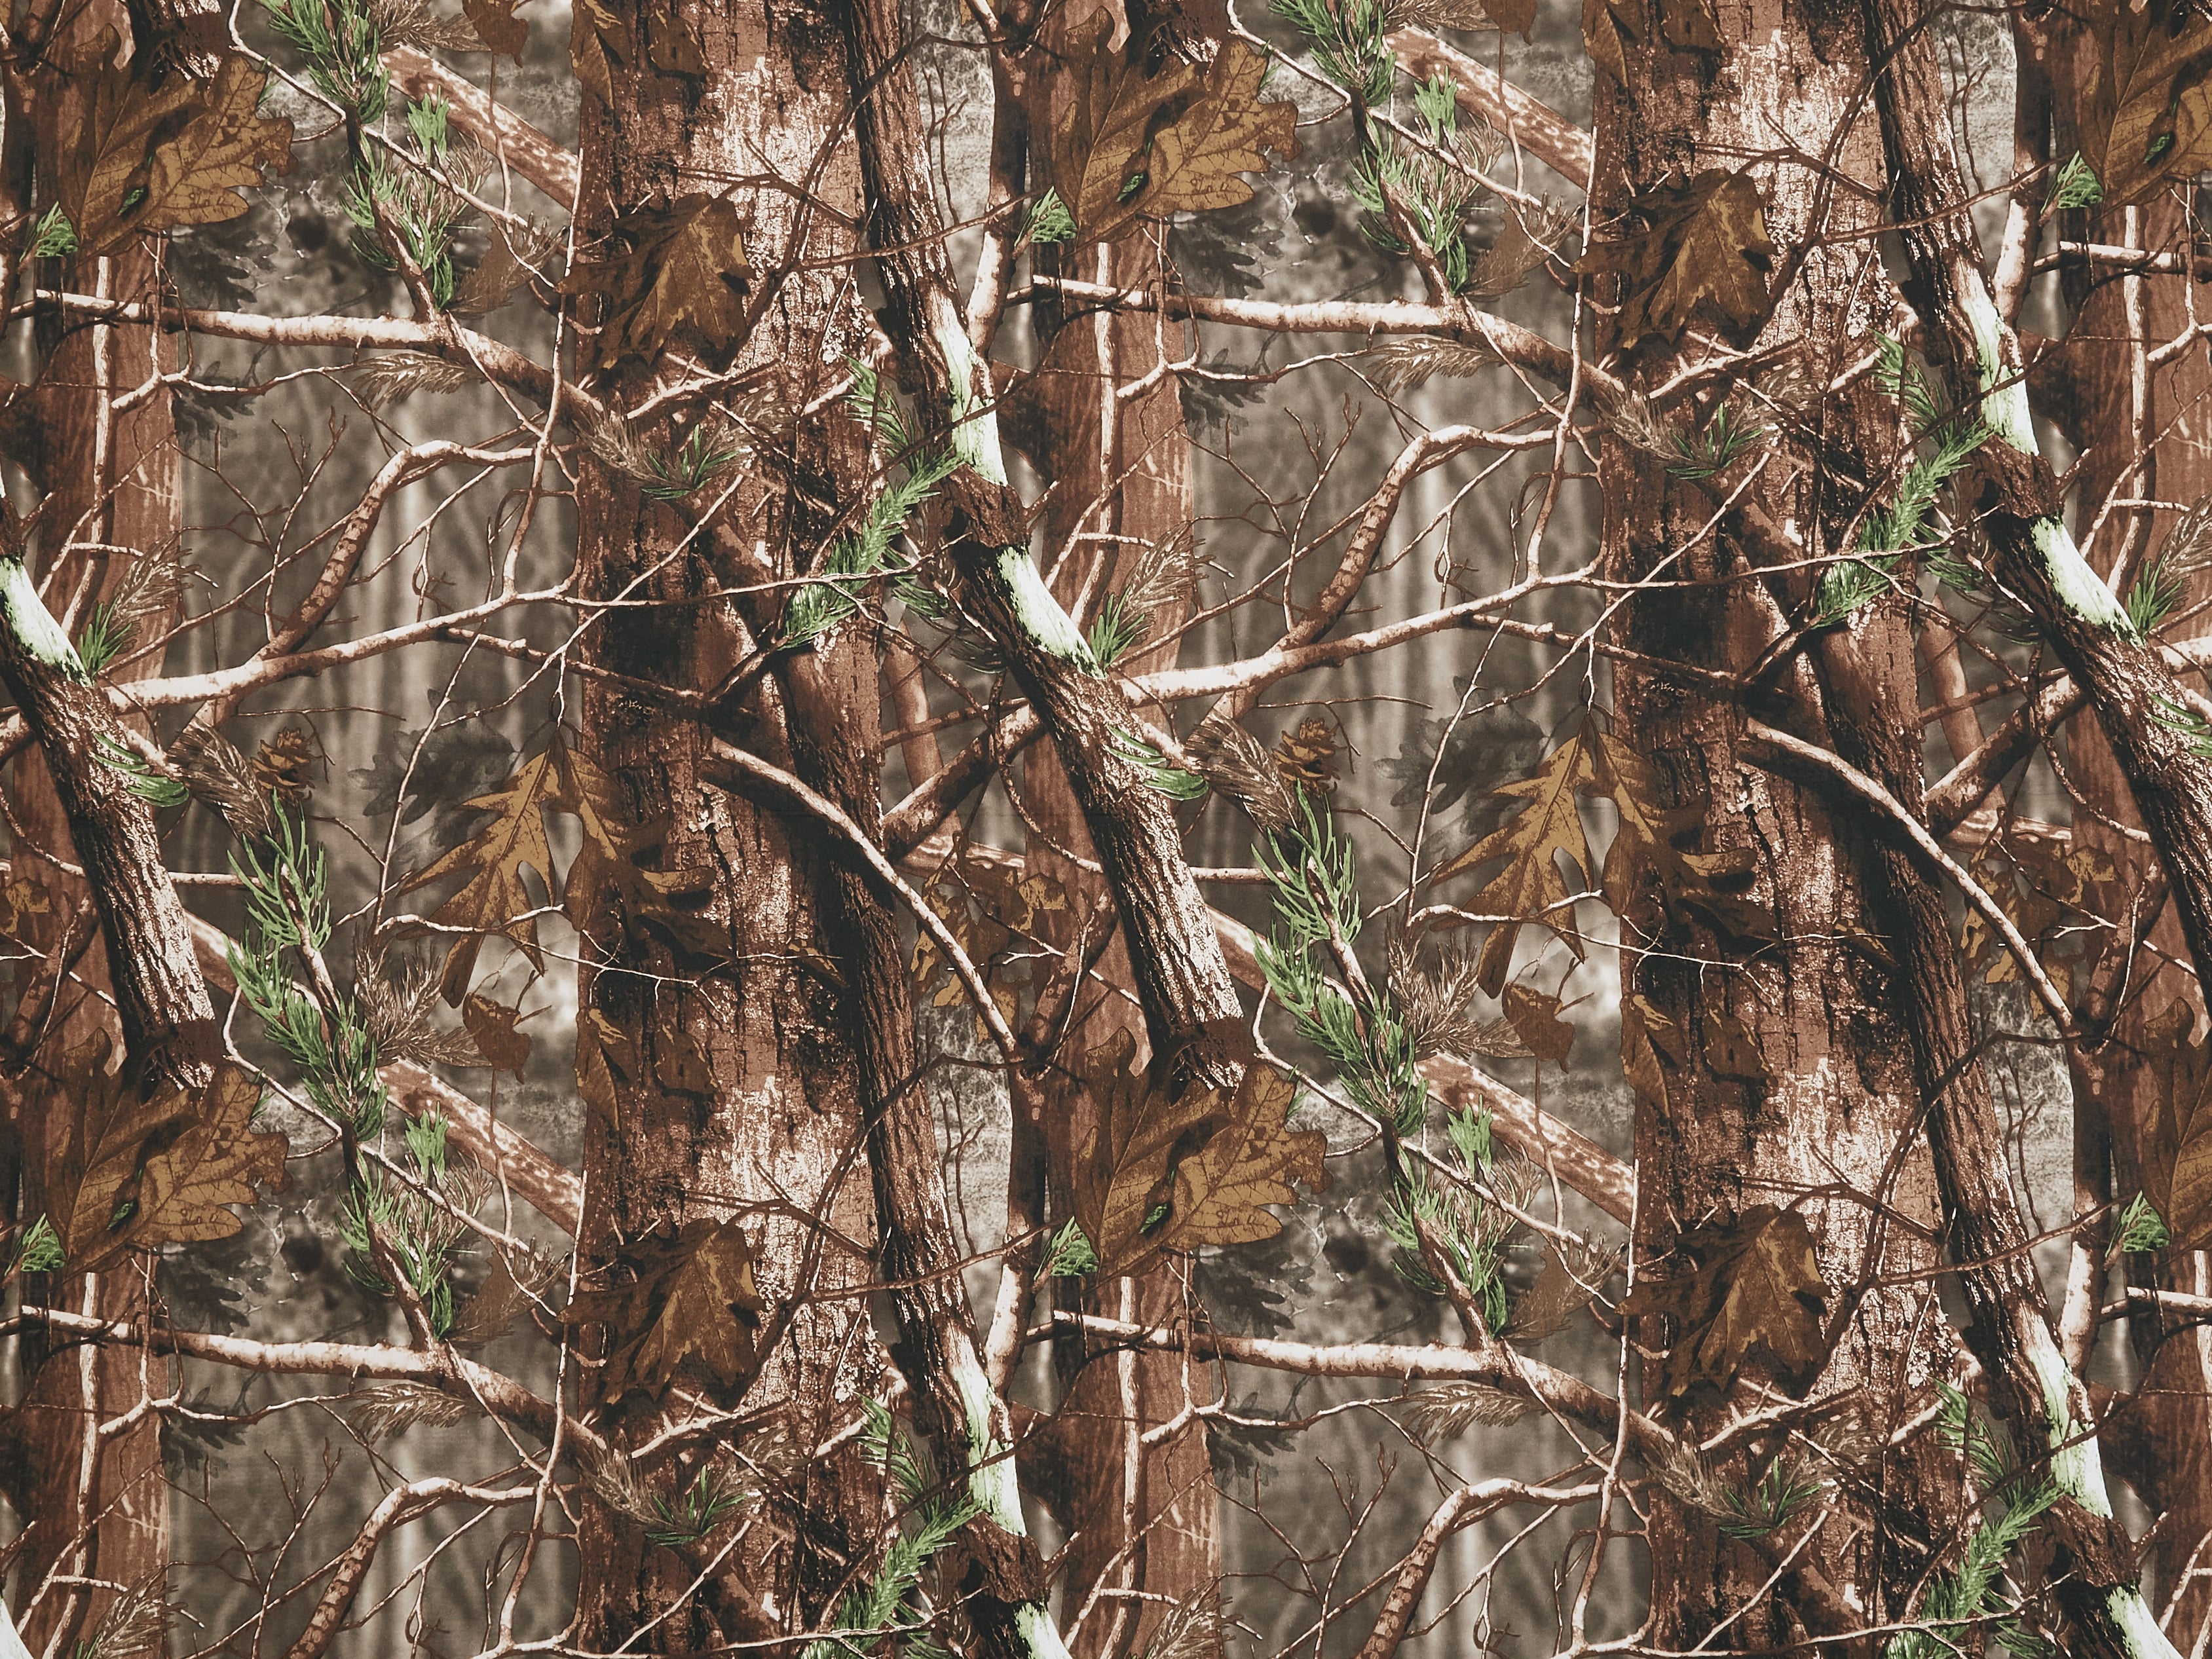 Do we really need camouflage-patterned hunting clothes?